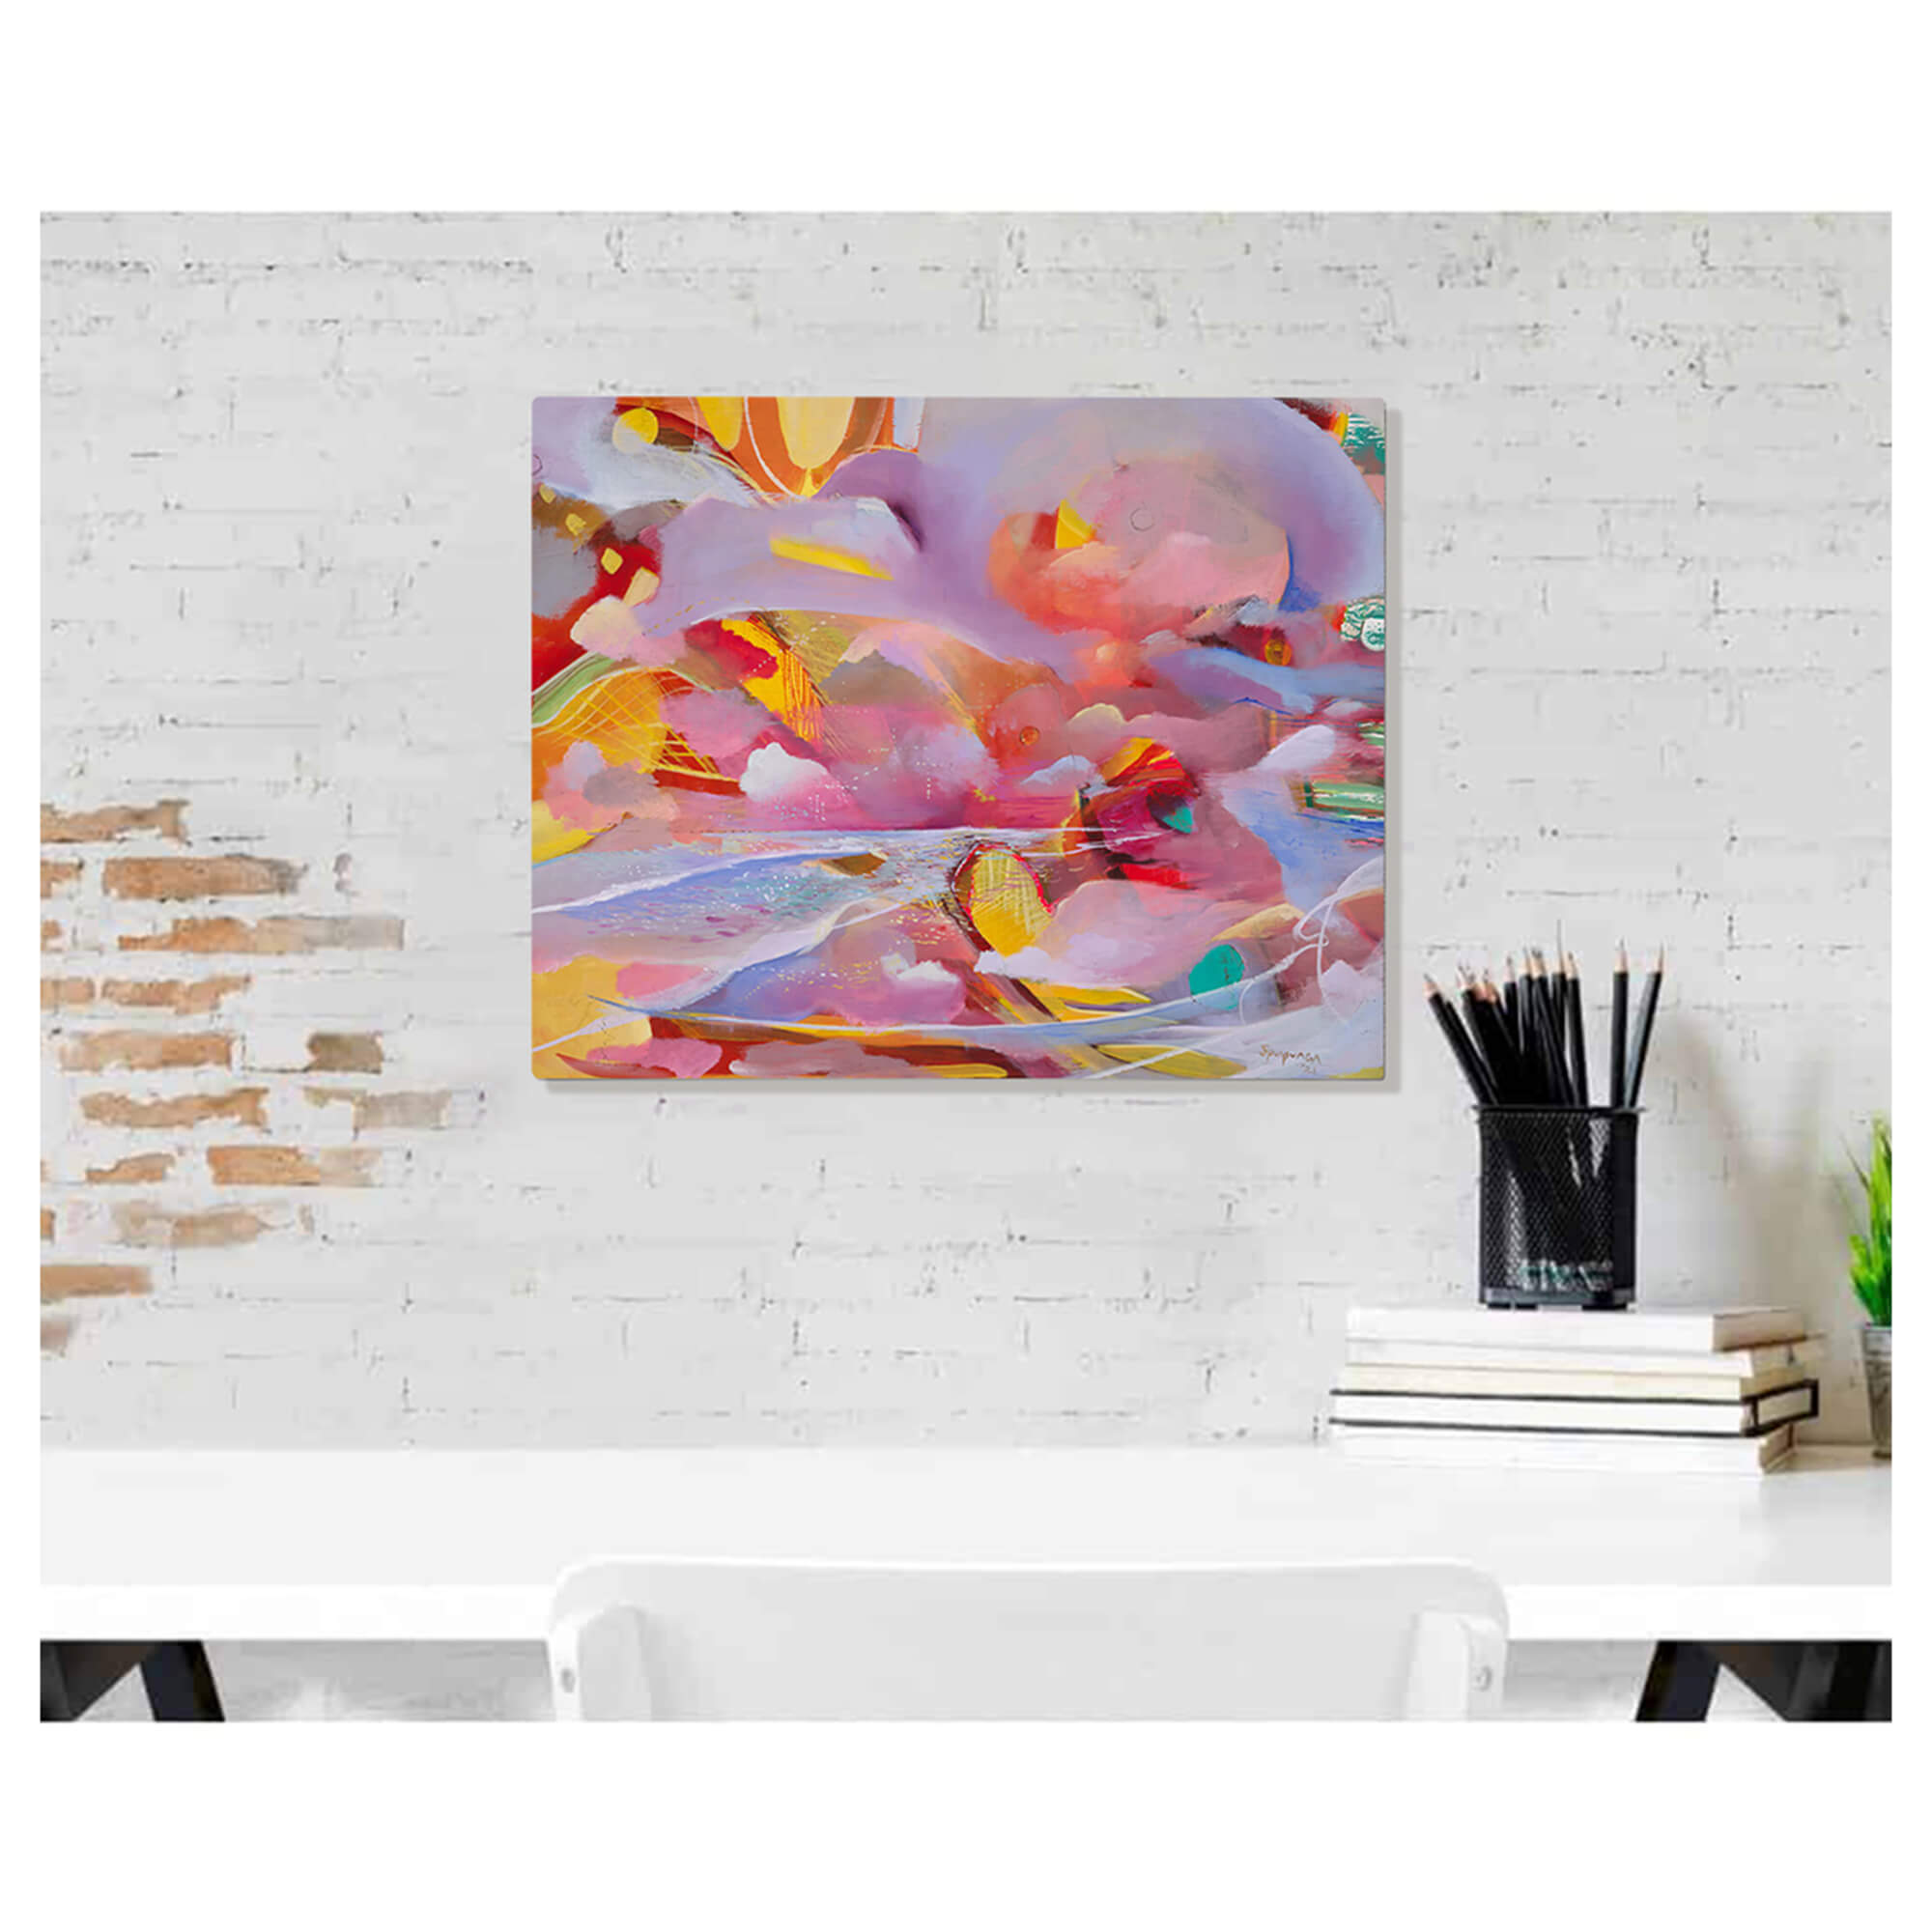 A metal art print of a vibrant artwork that features the beach horizon with cotton candy colors by Hawaii artist Saumolia Puapuaga